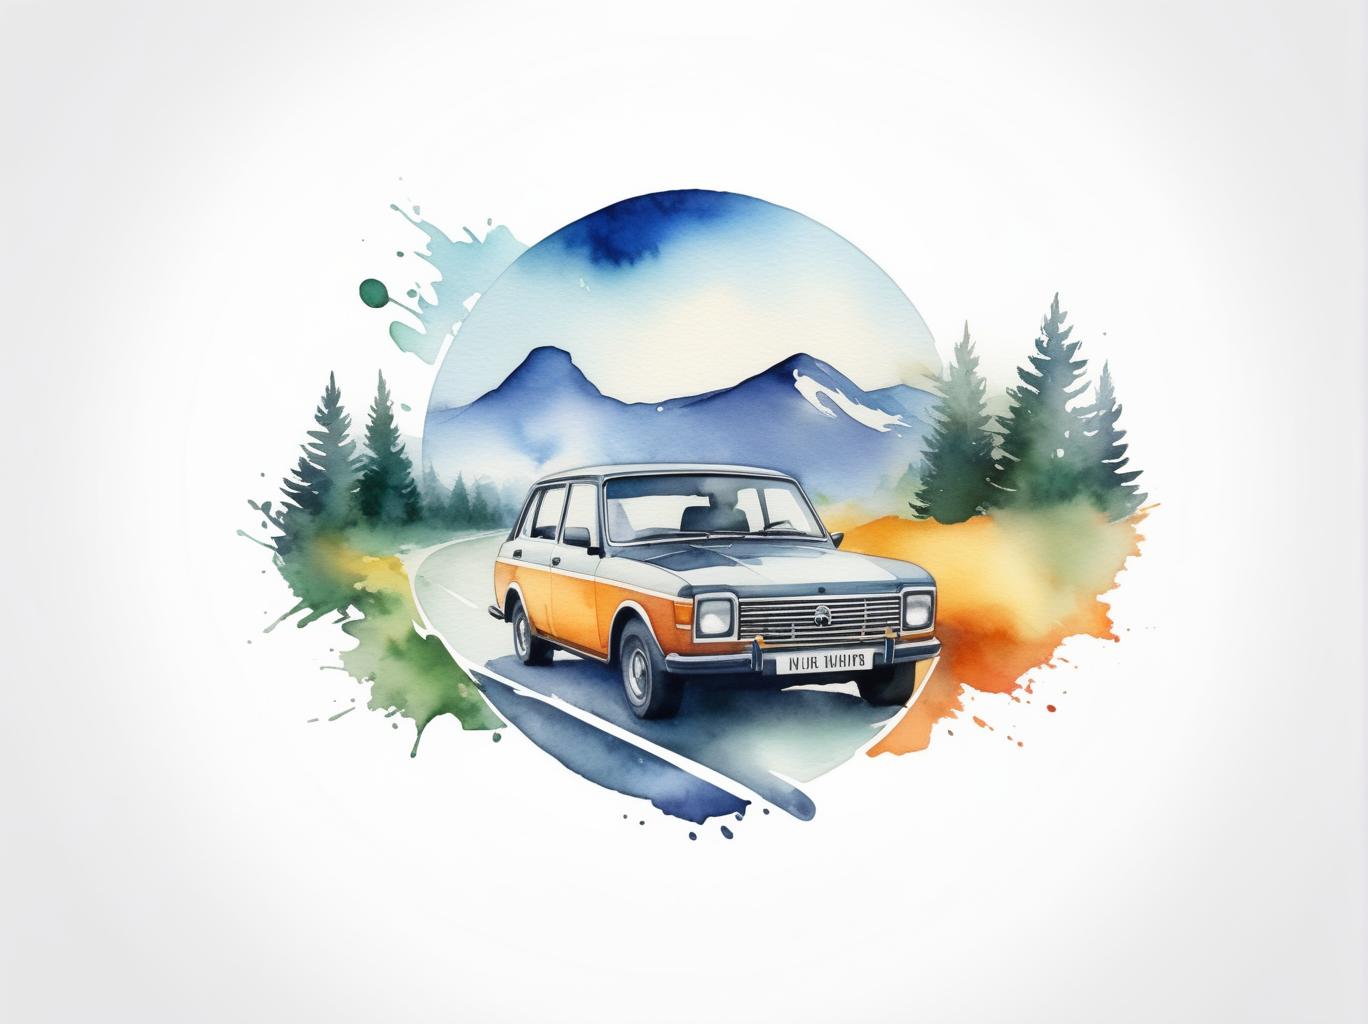  Logo, (watercolor style), create an image with northing and vehicle tracking